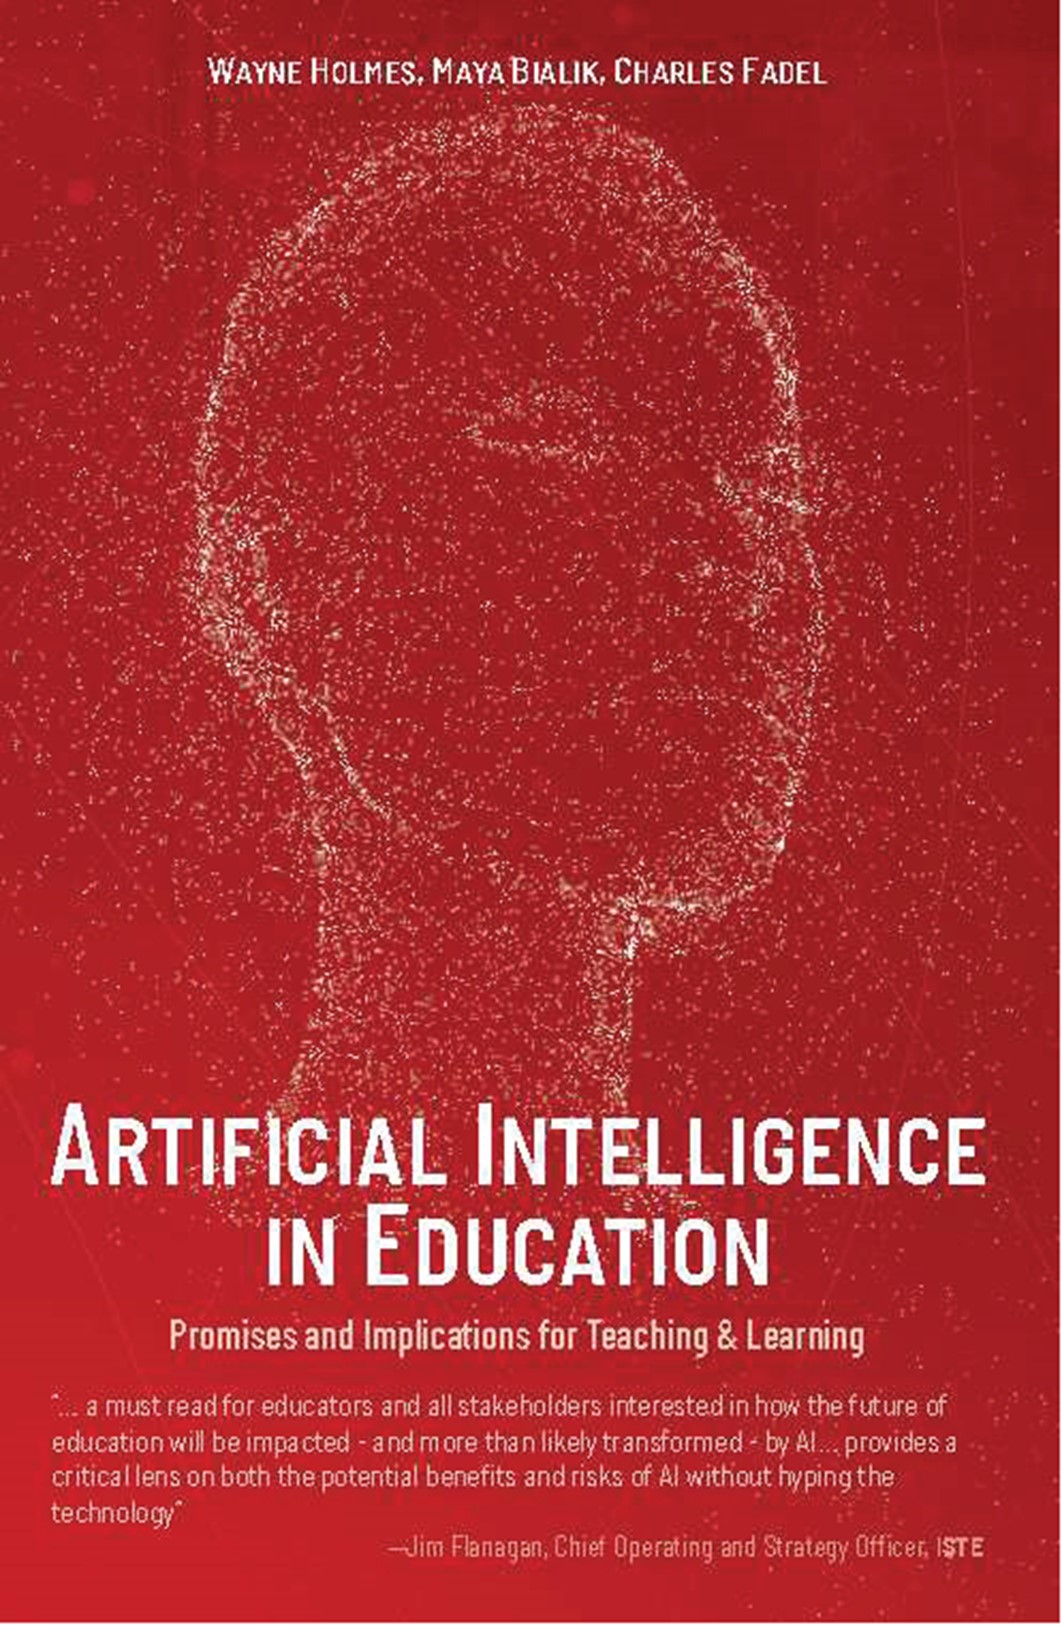 Artificial intelligence book cover